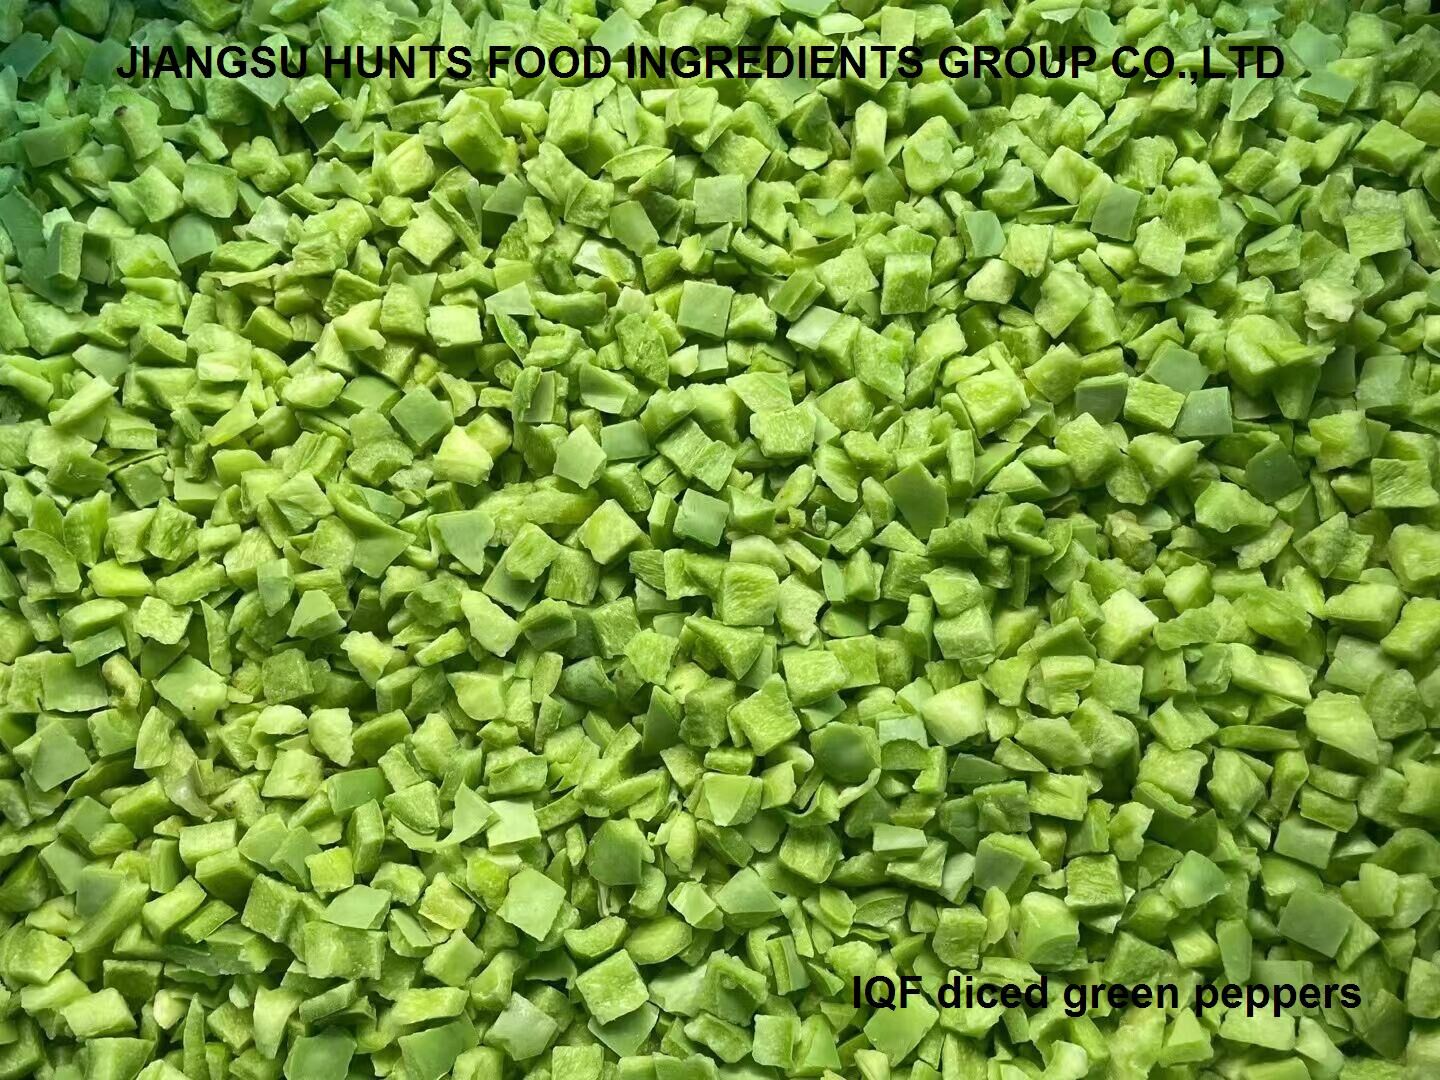 IQF diced green peppers